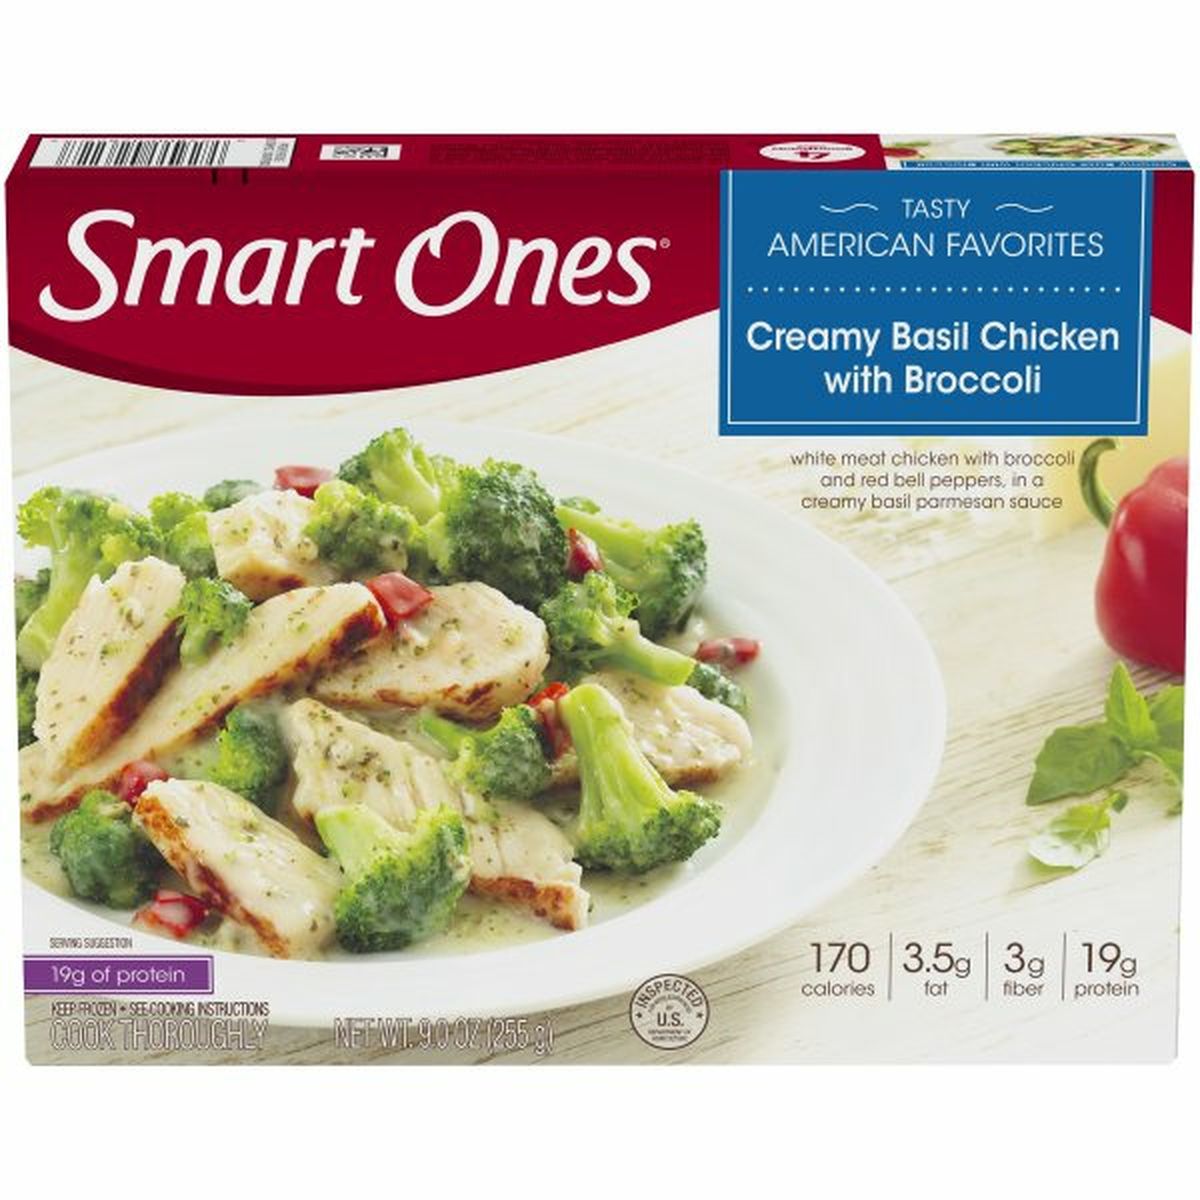 Calories in Smart Ones Tasty American Favorites Creamy Basil Chicken with Broccoli